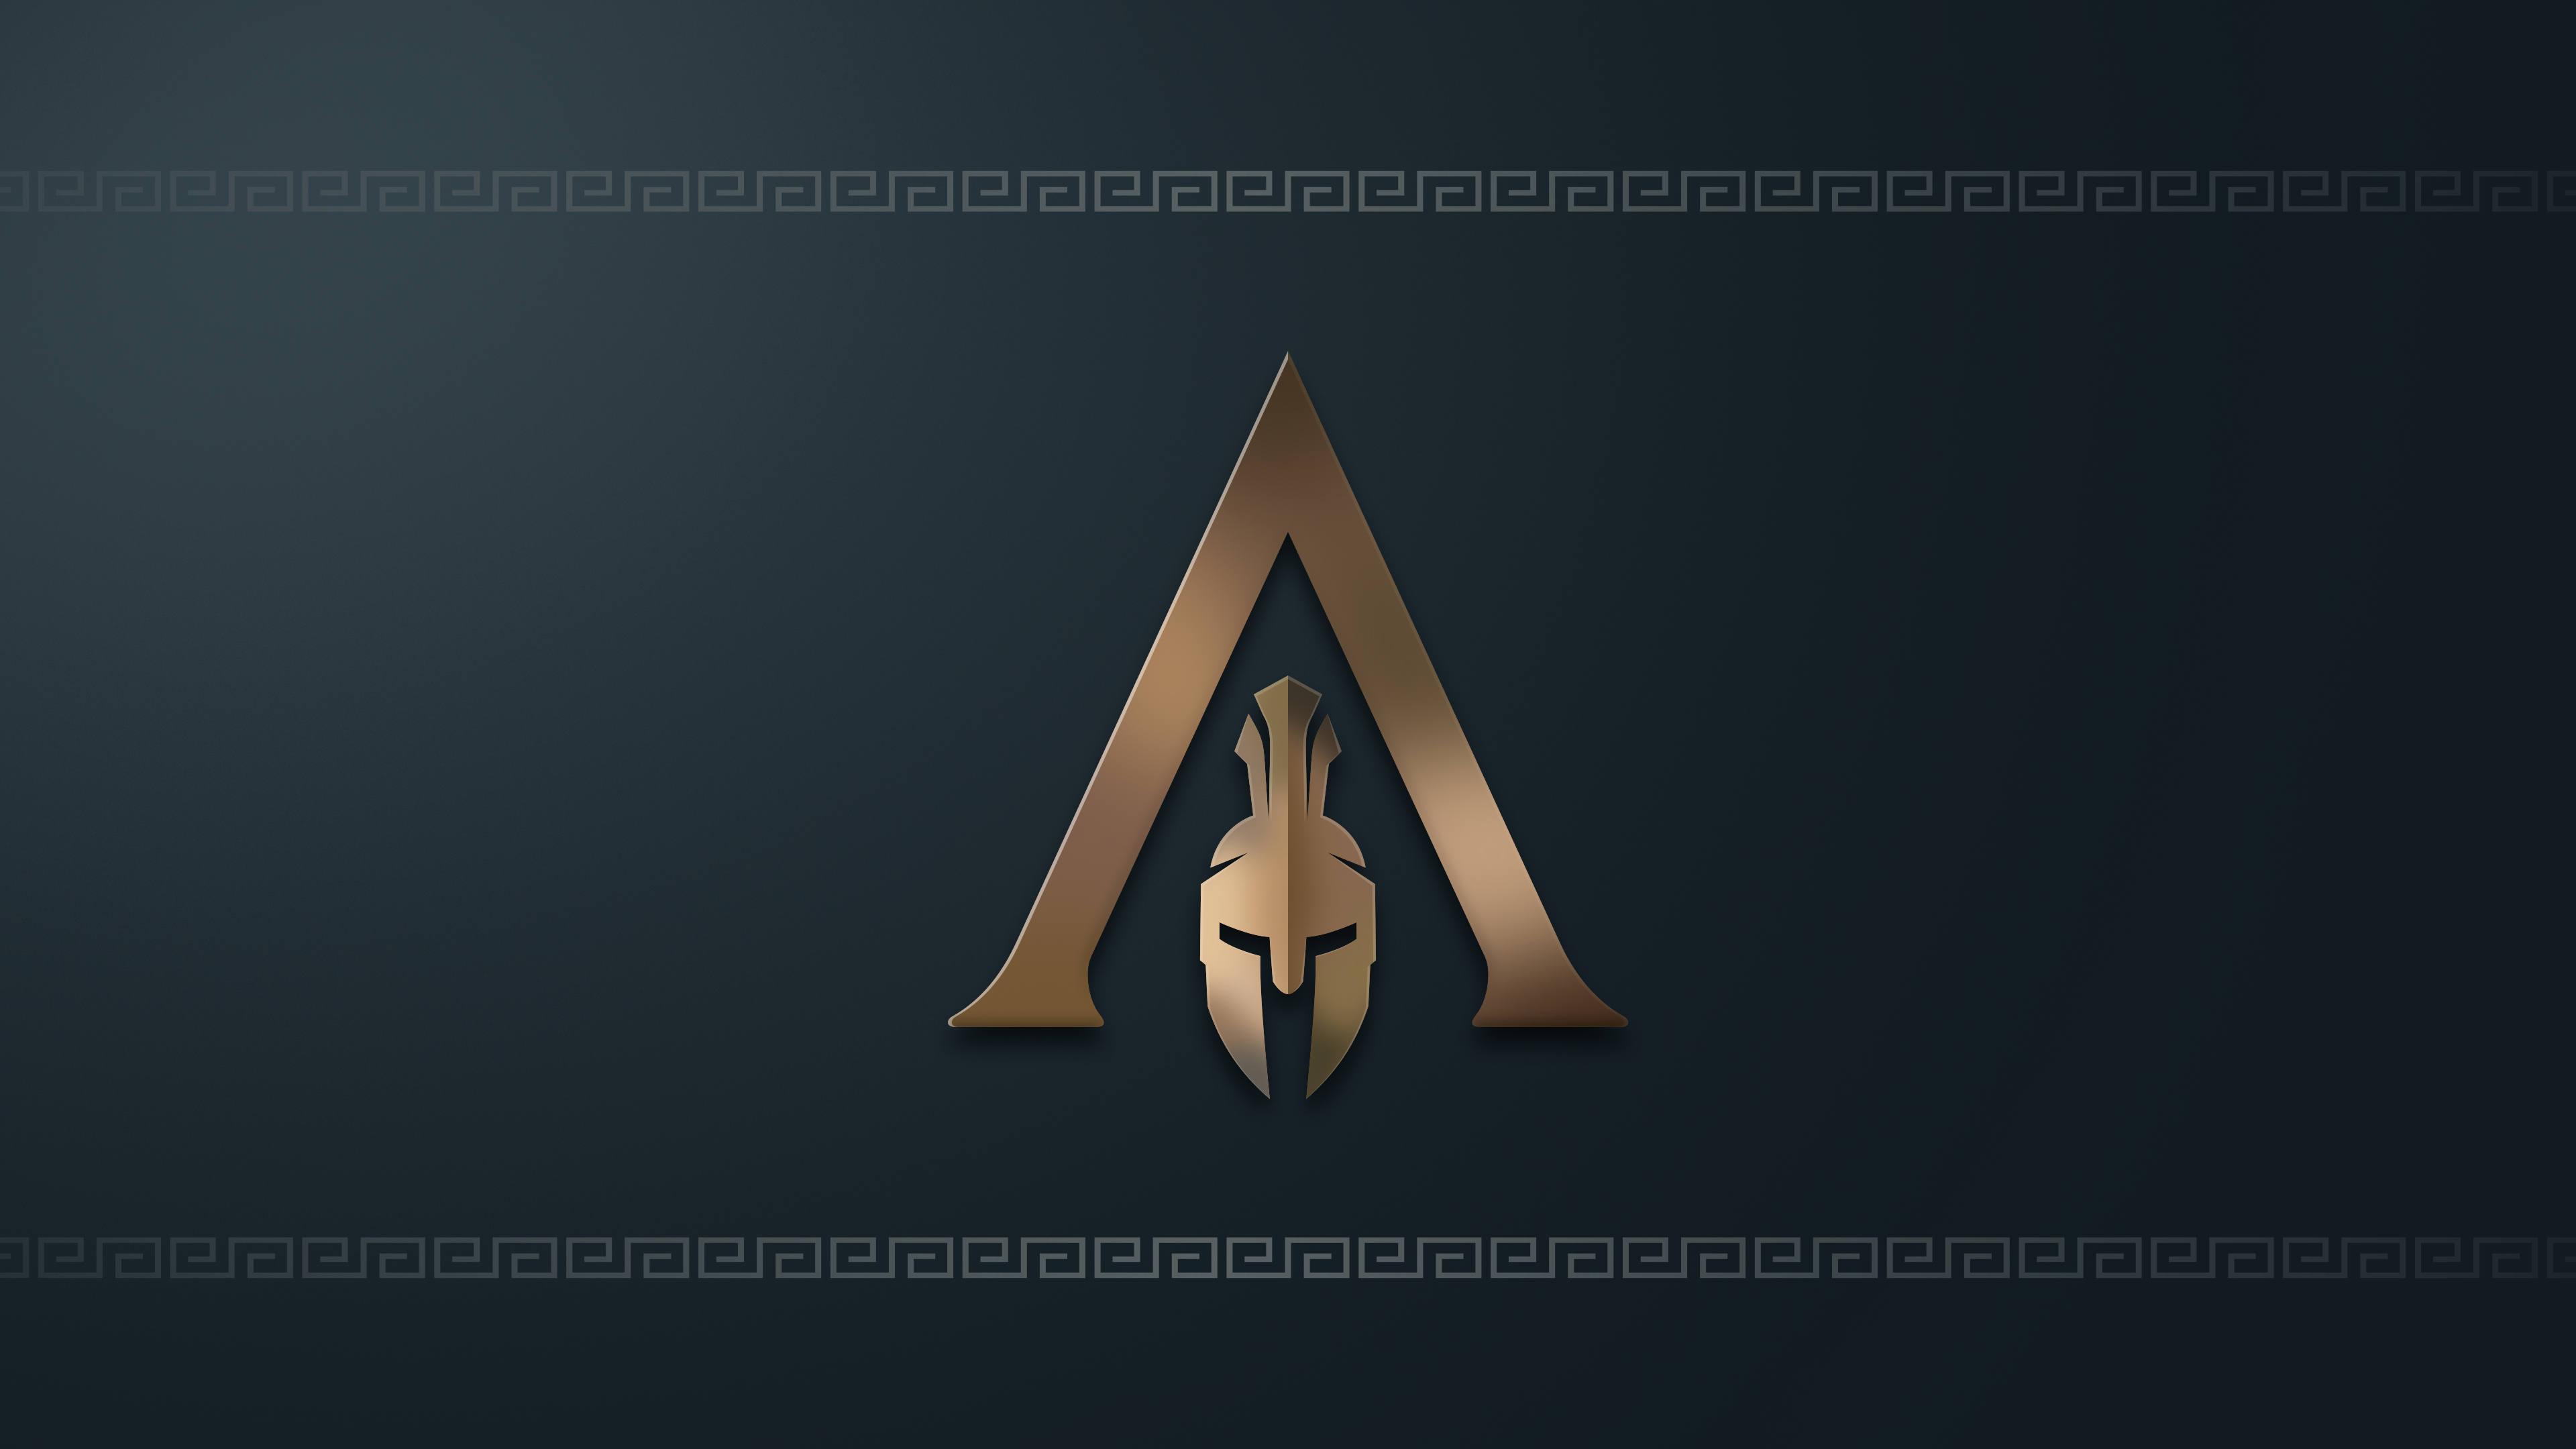 assassin's creed odyssey, spartan, assassin's creed, video game